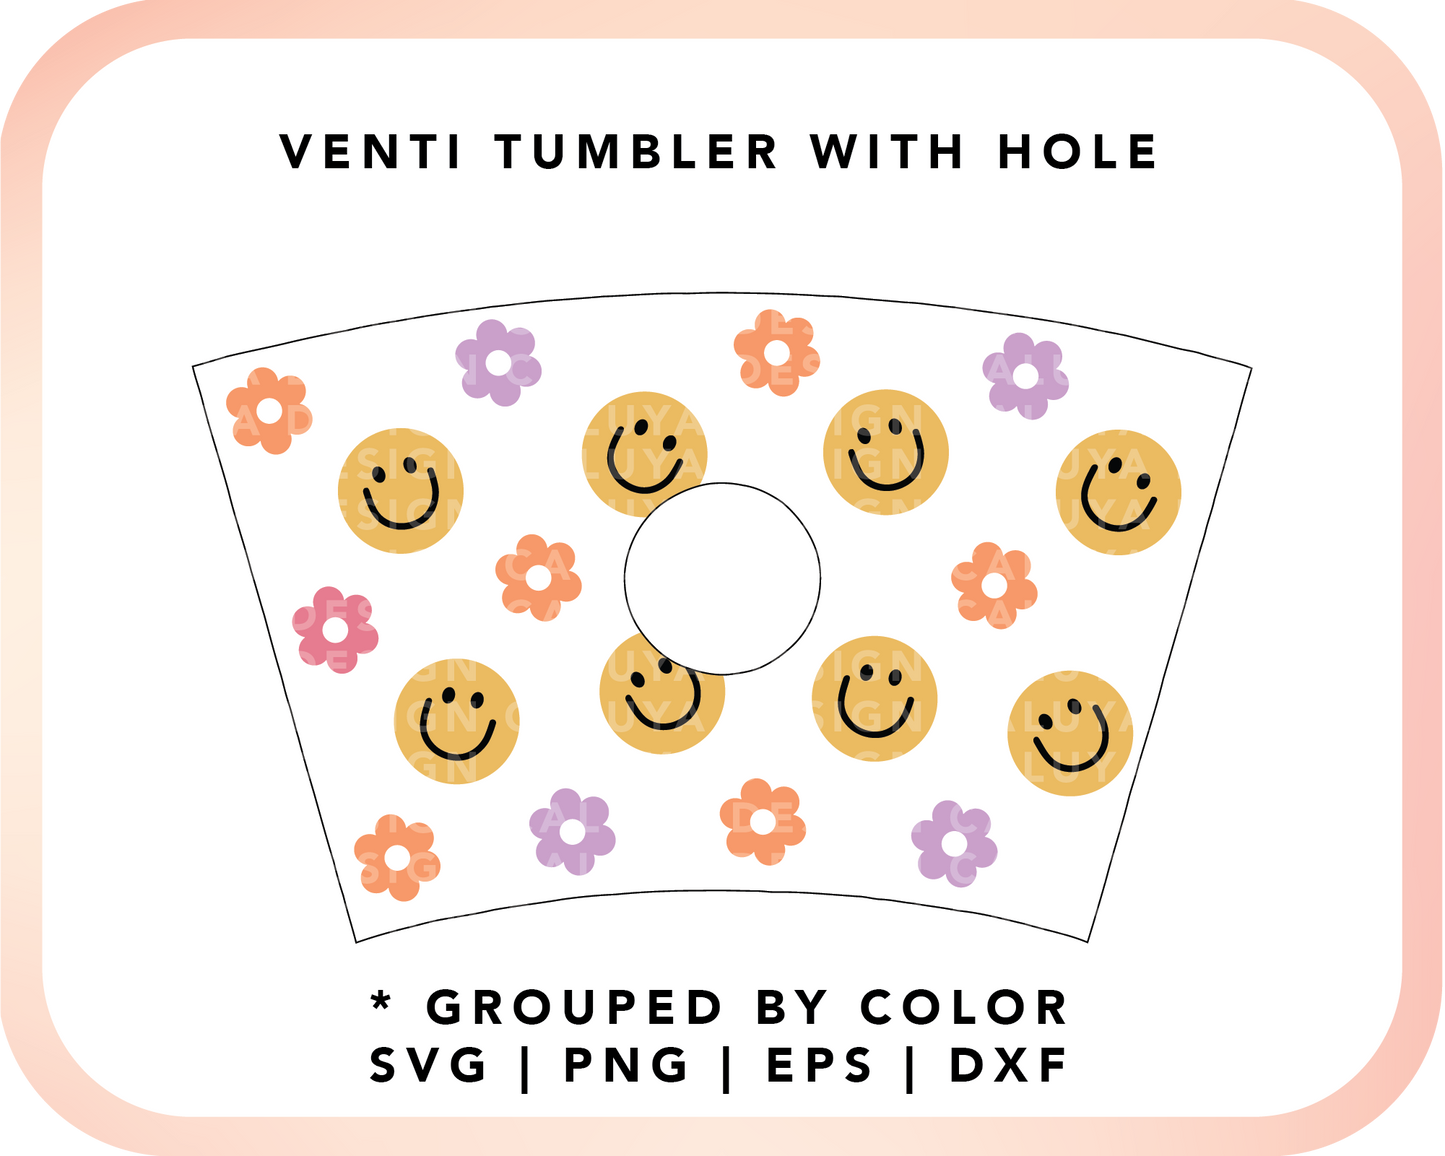 With Logo Venti Cup Wrap SVG | Smiles and flowers